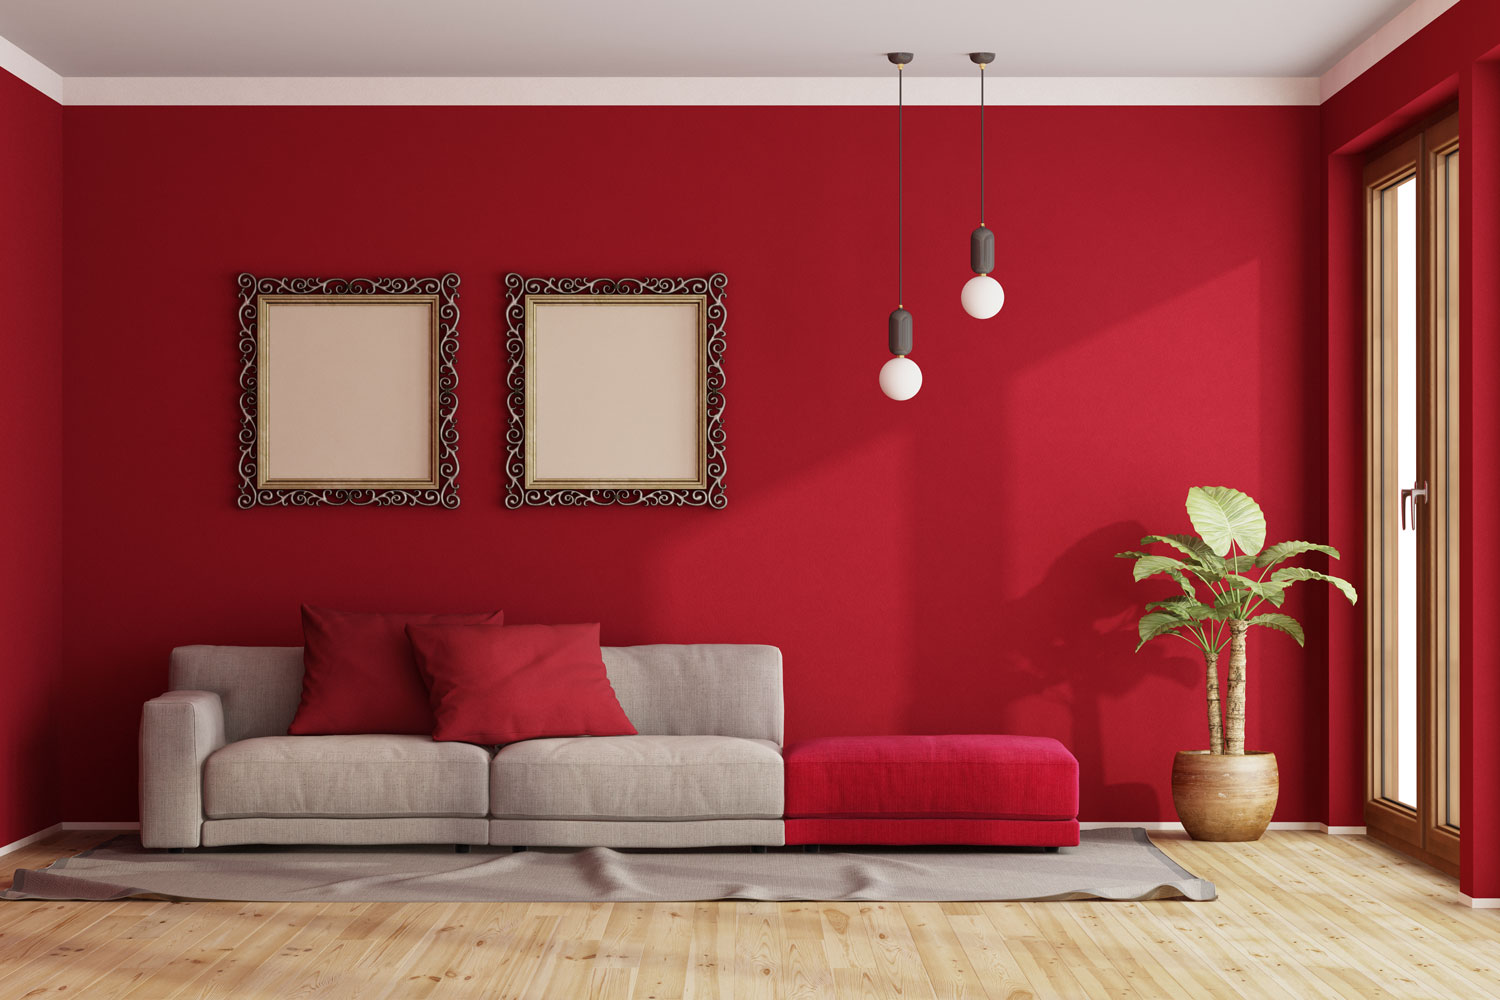 Gorgeous and classy red designed living room with laminated flooring